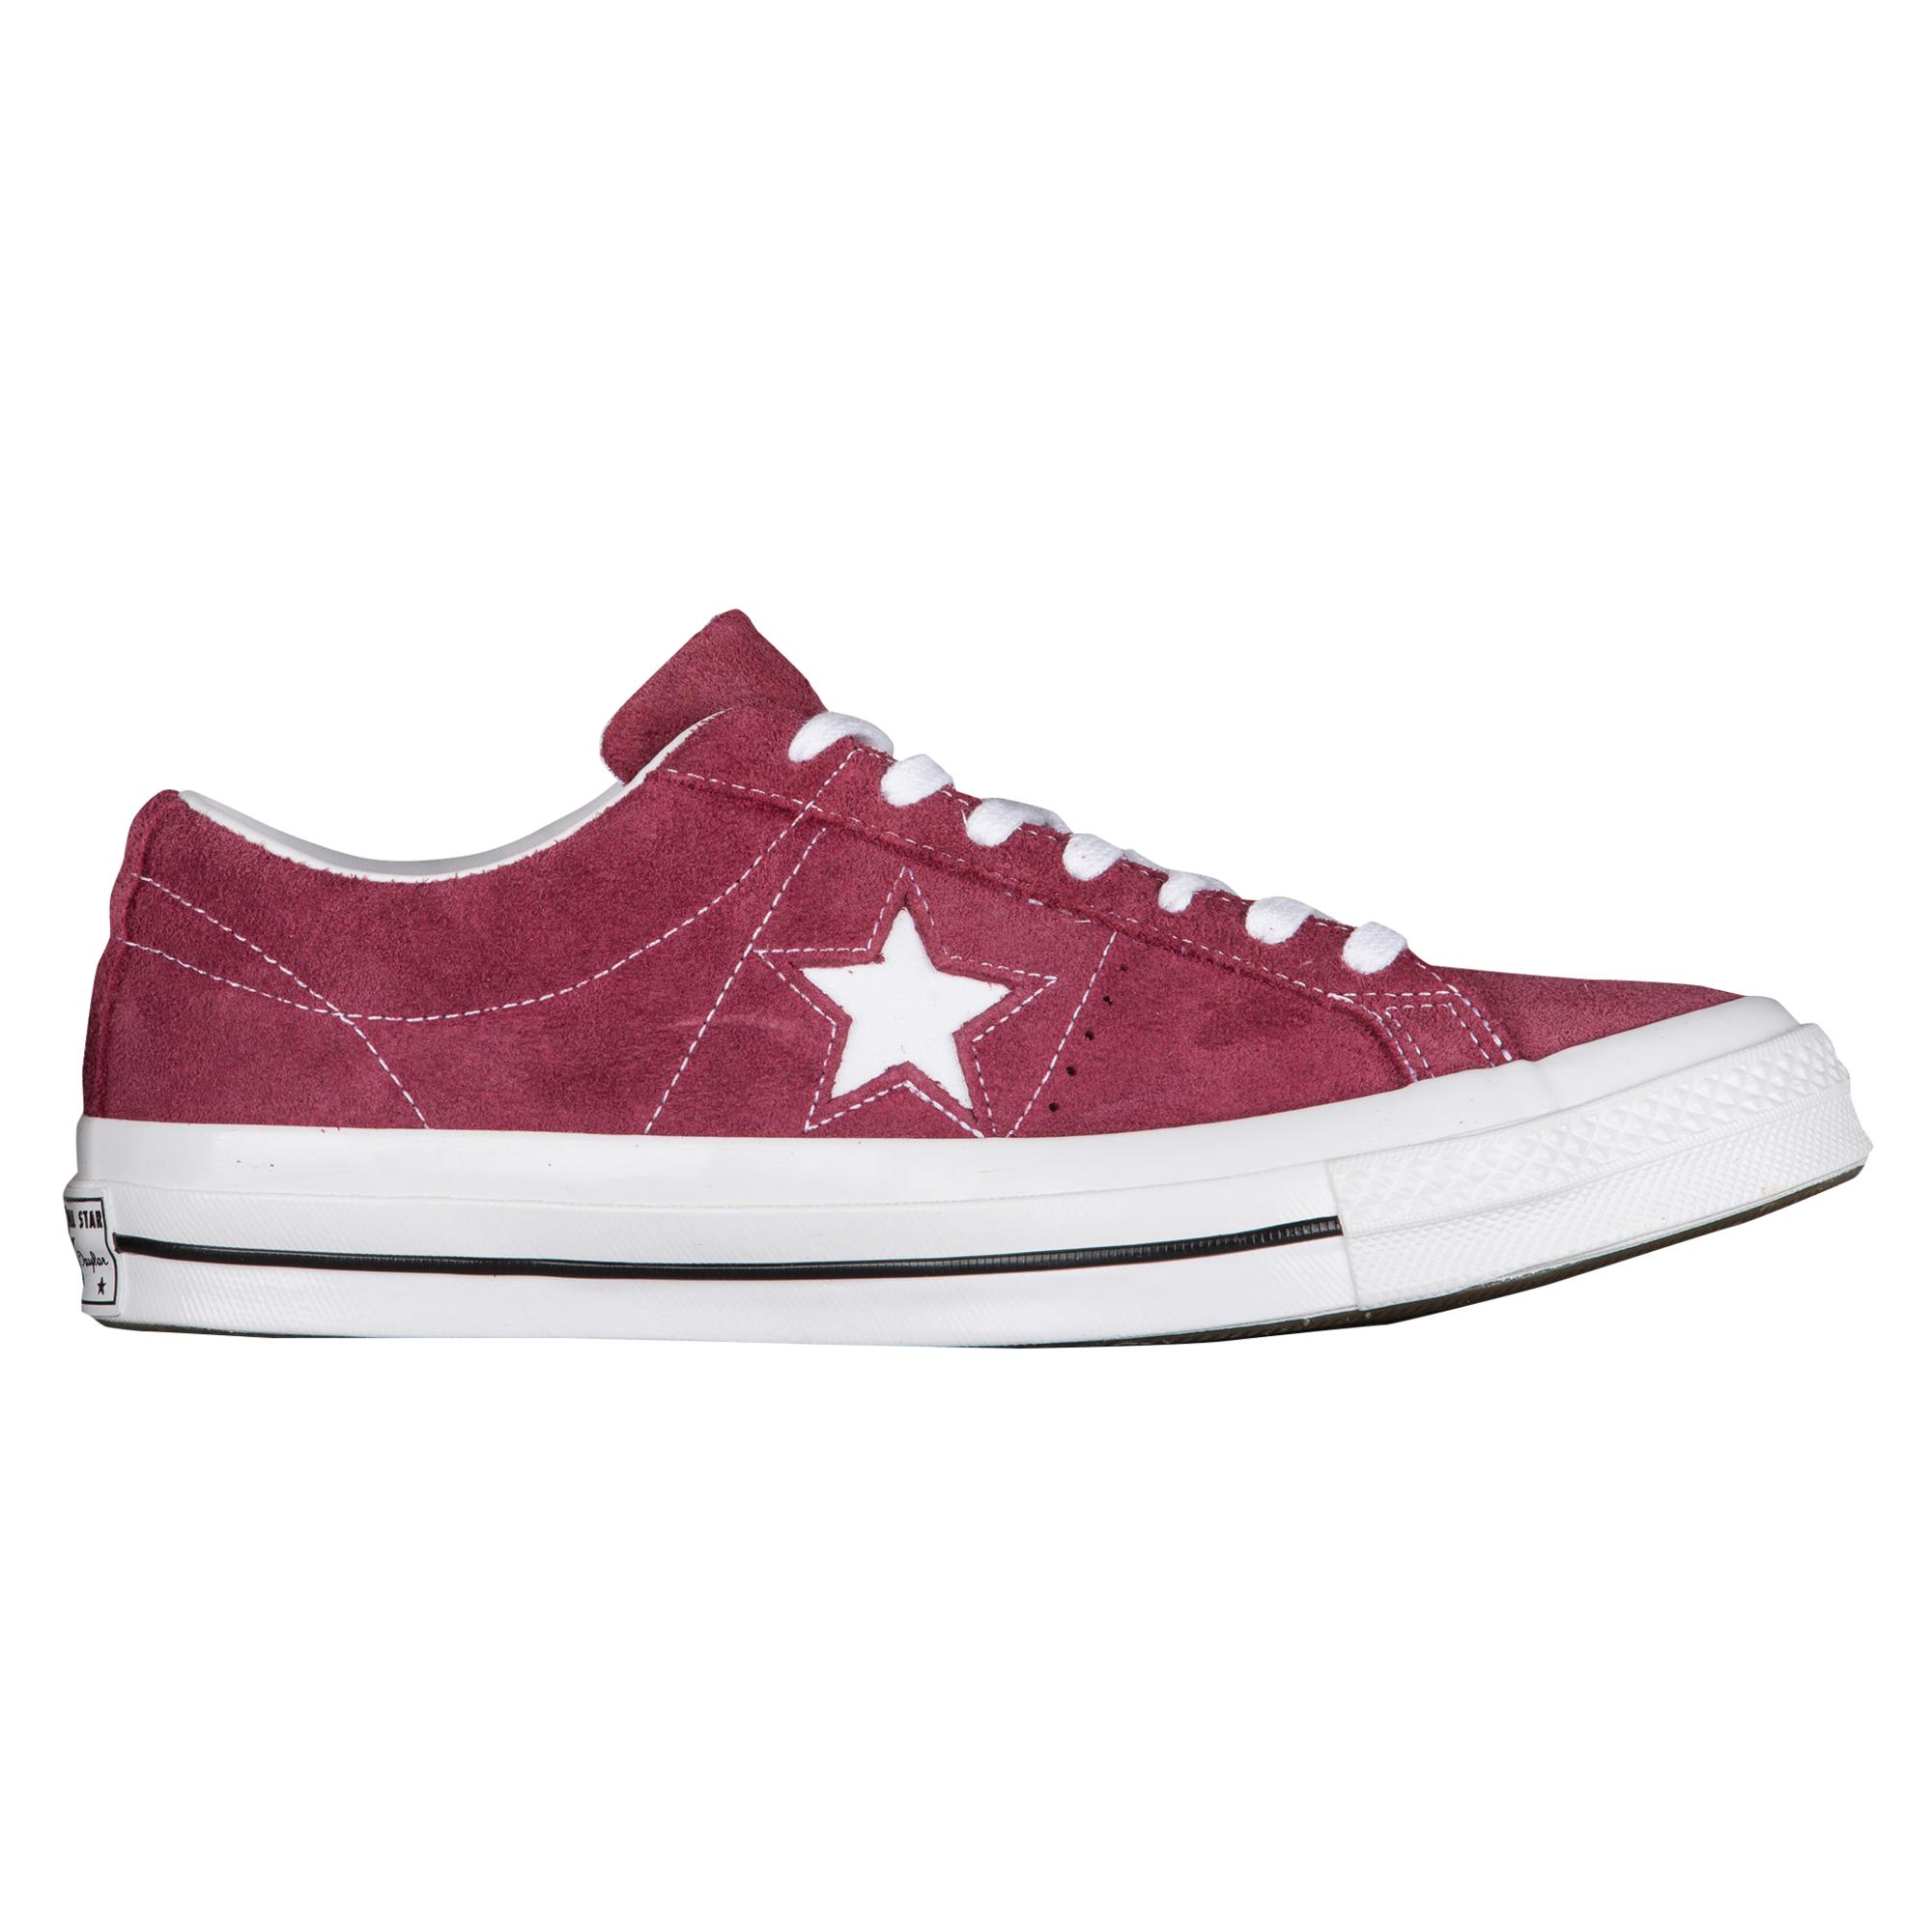 Converse One Star Ox in Purple for Men - Lyst